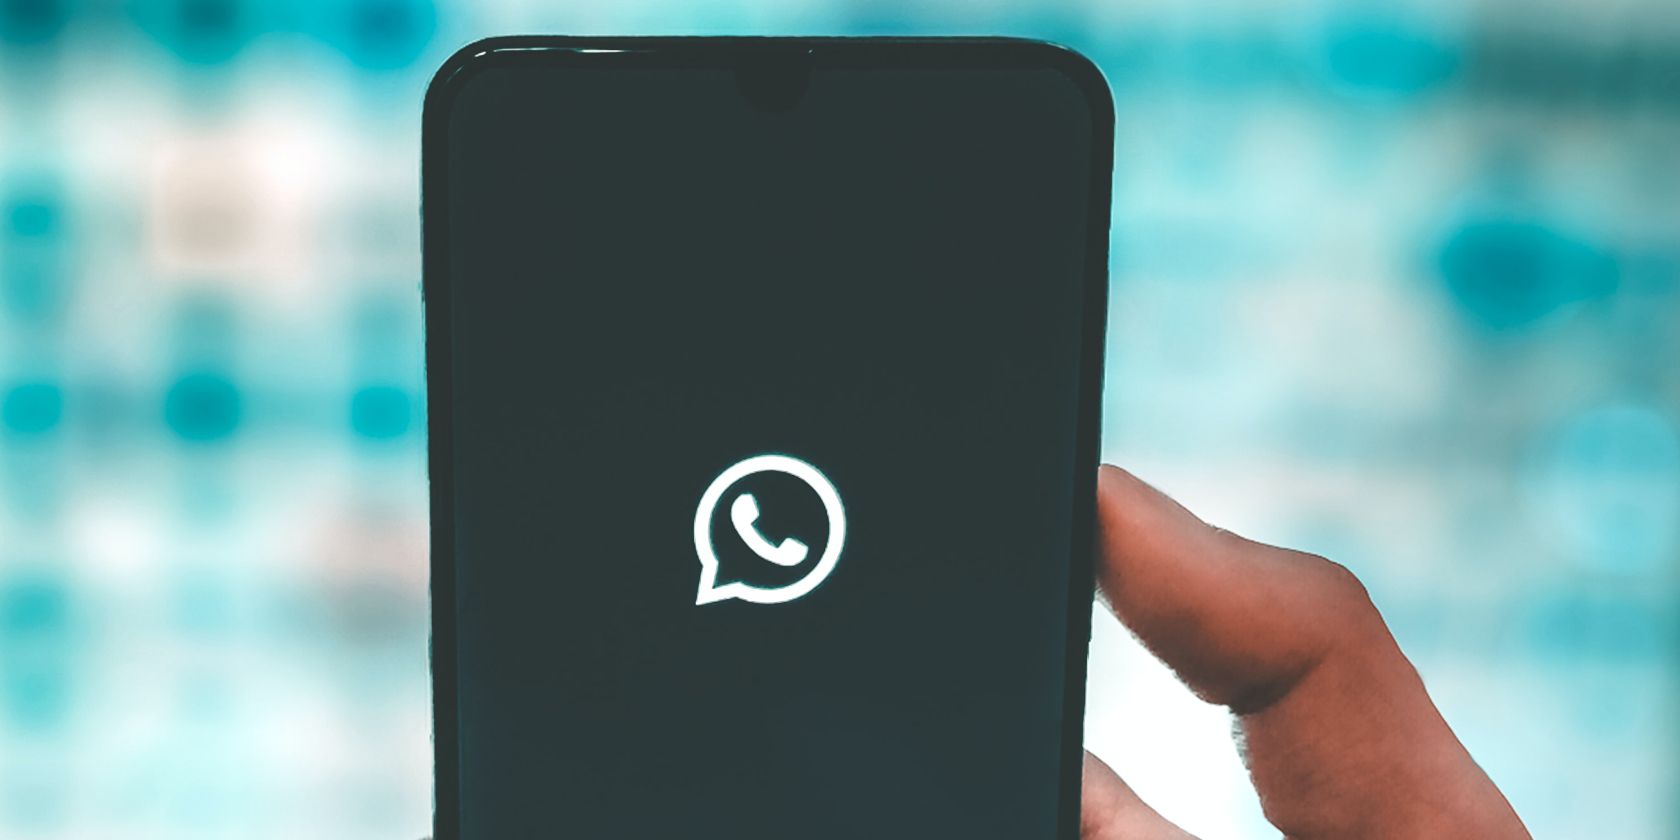 Close-up of the WhatsApp logo on a phone being held up